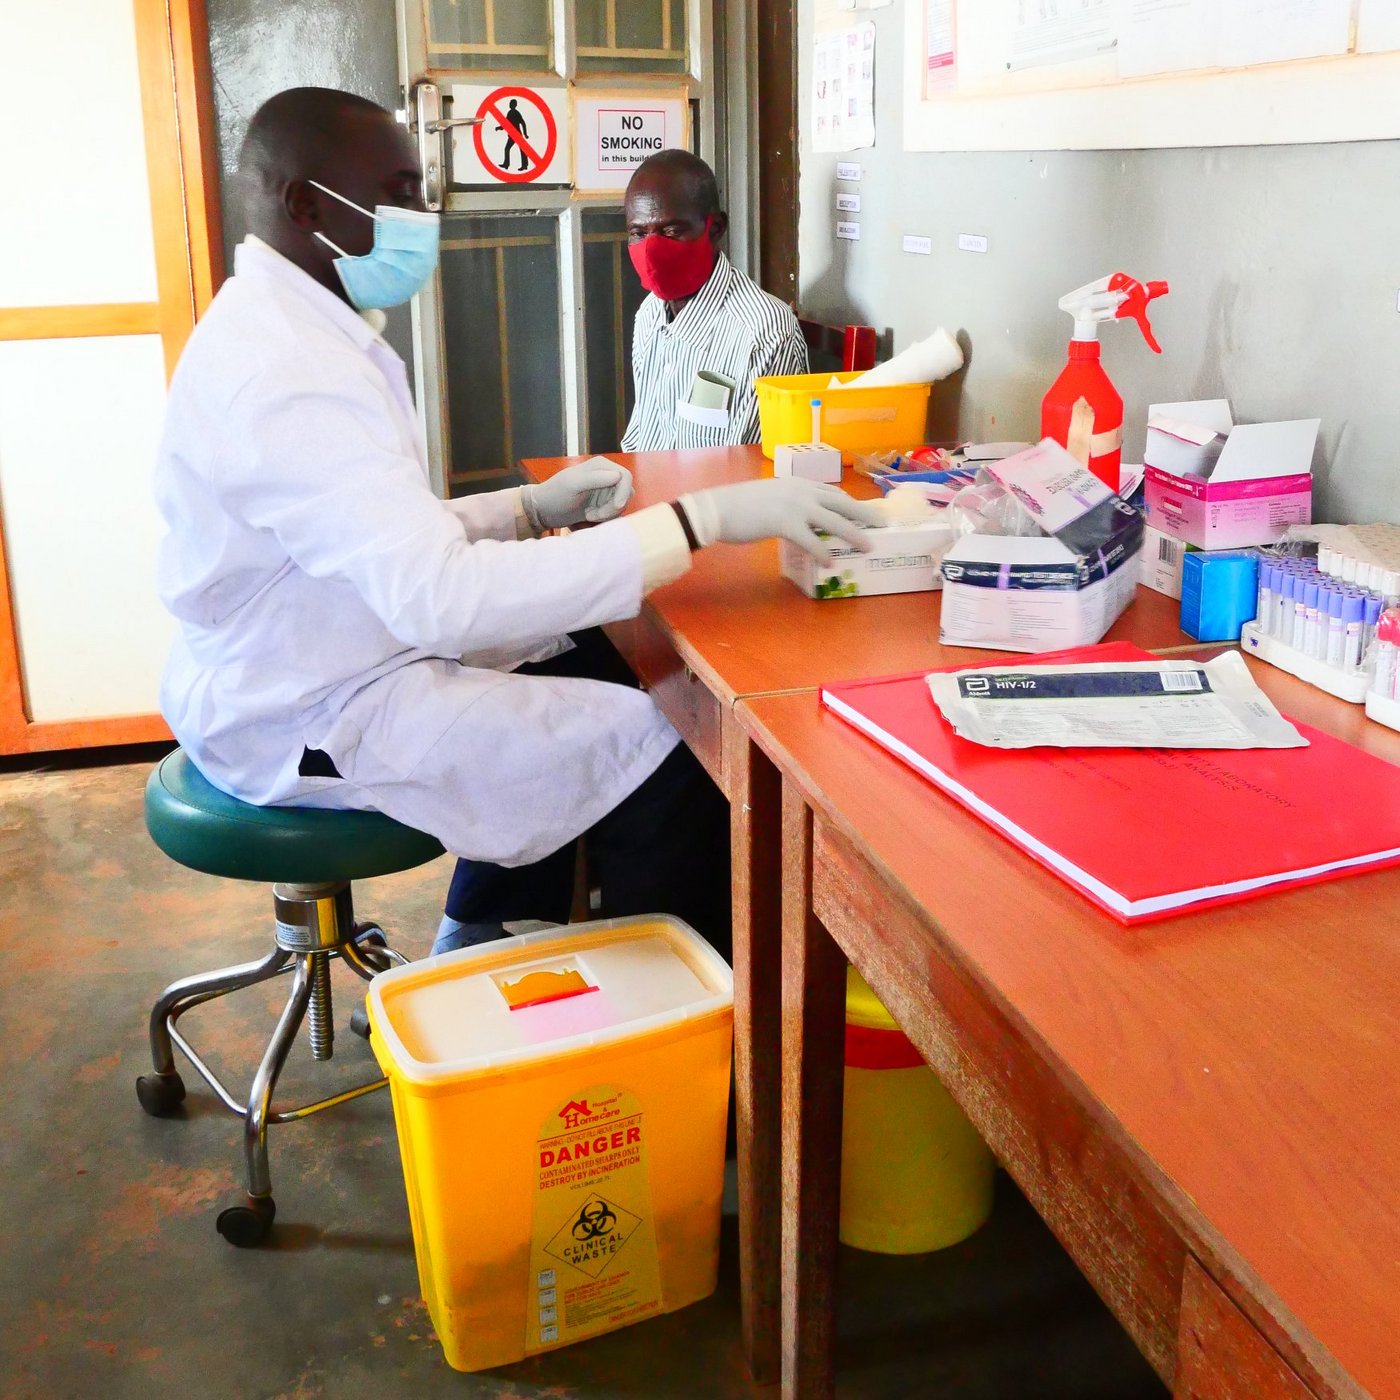 Covid 19 testing at Bobbi Hospital, Uganda. A person works at a table on which laboratory utensils are lying. The person is wearing gloves, a mask and a lab coat. Another person is sitting on a chair next to the table.